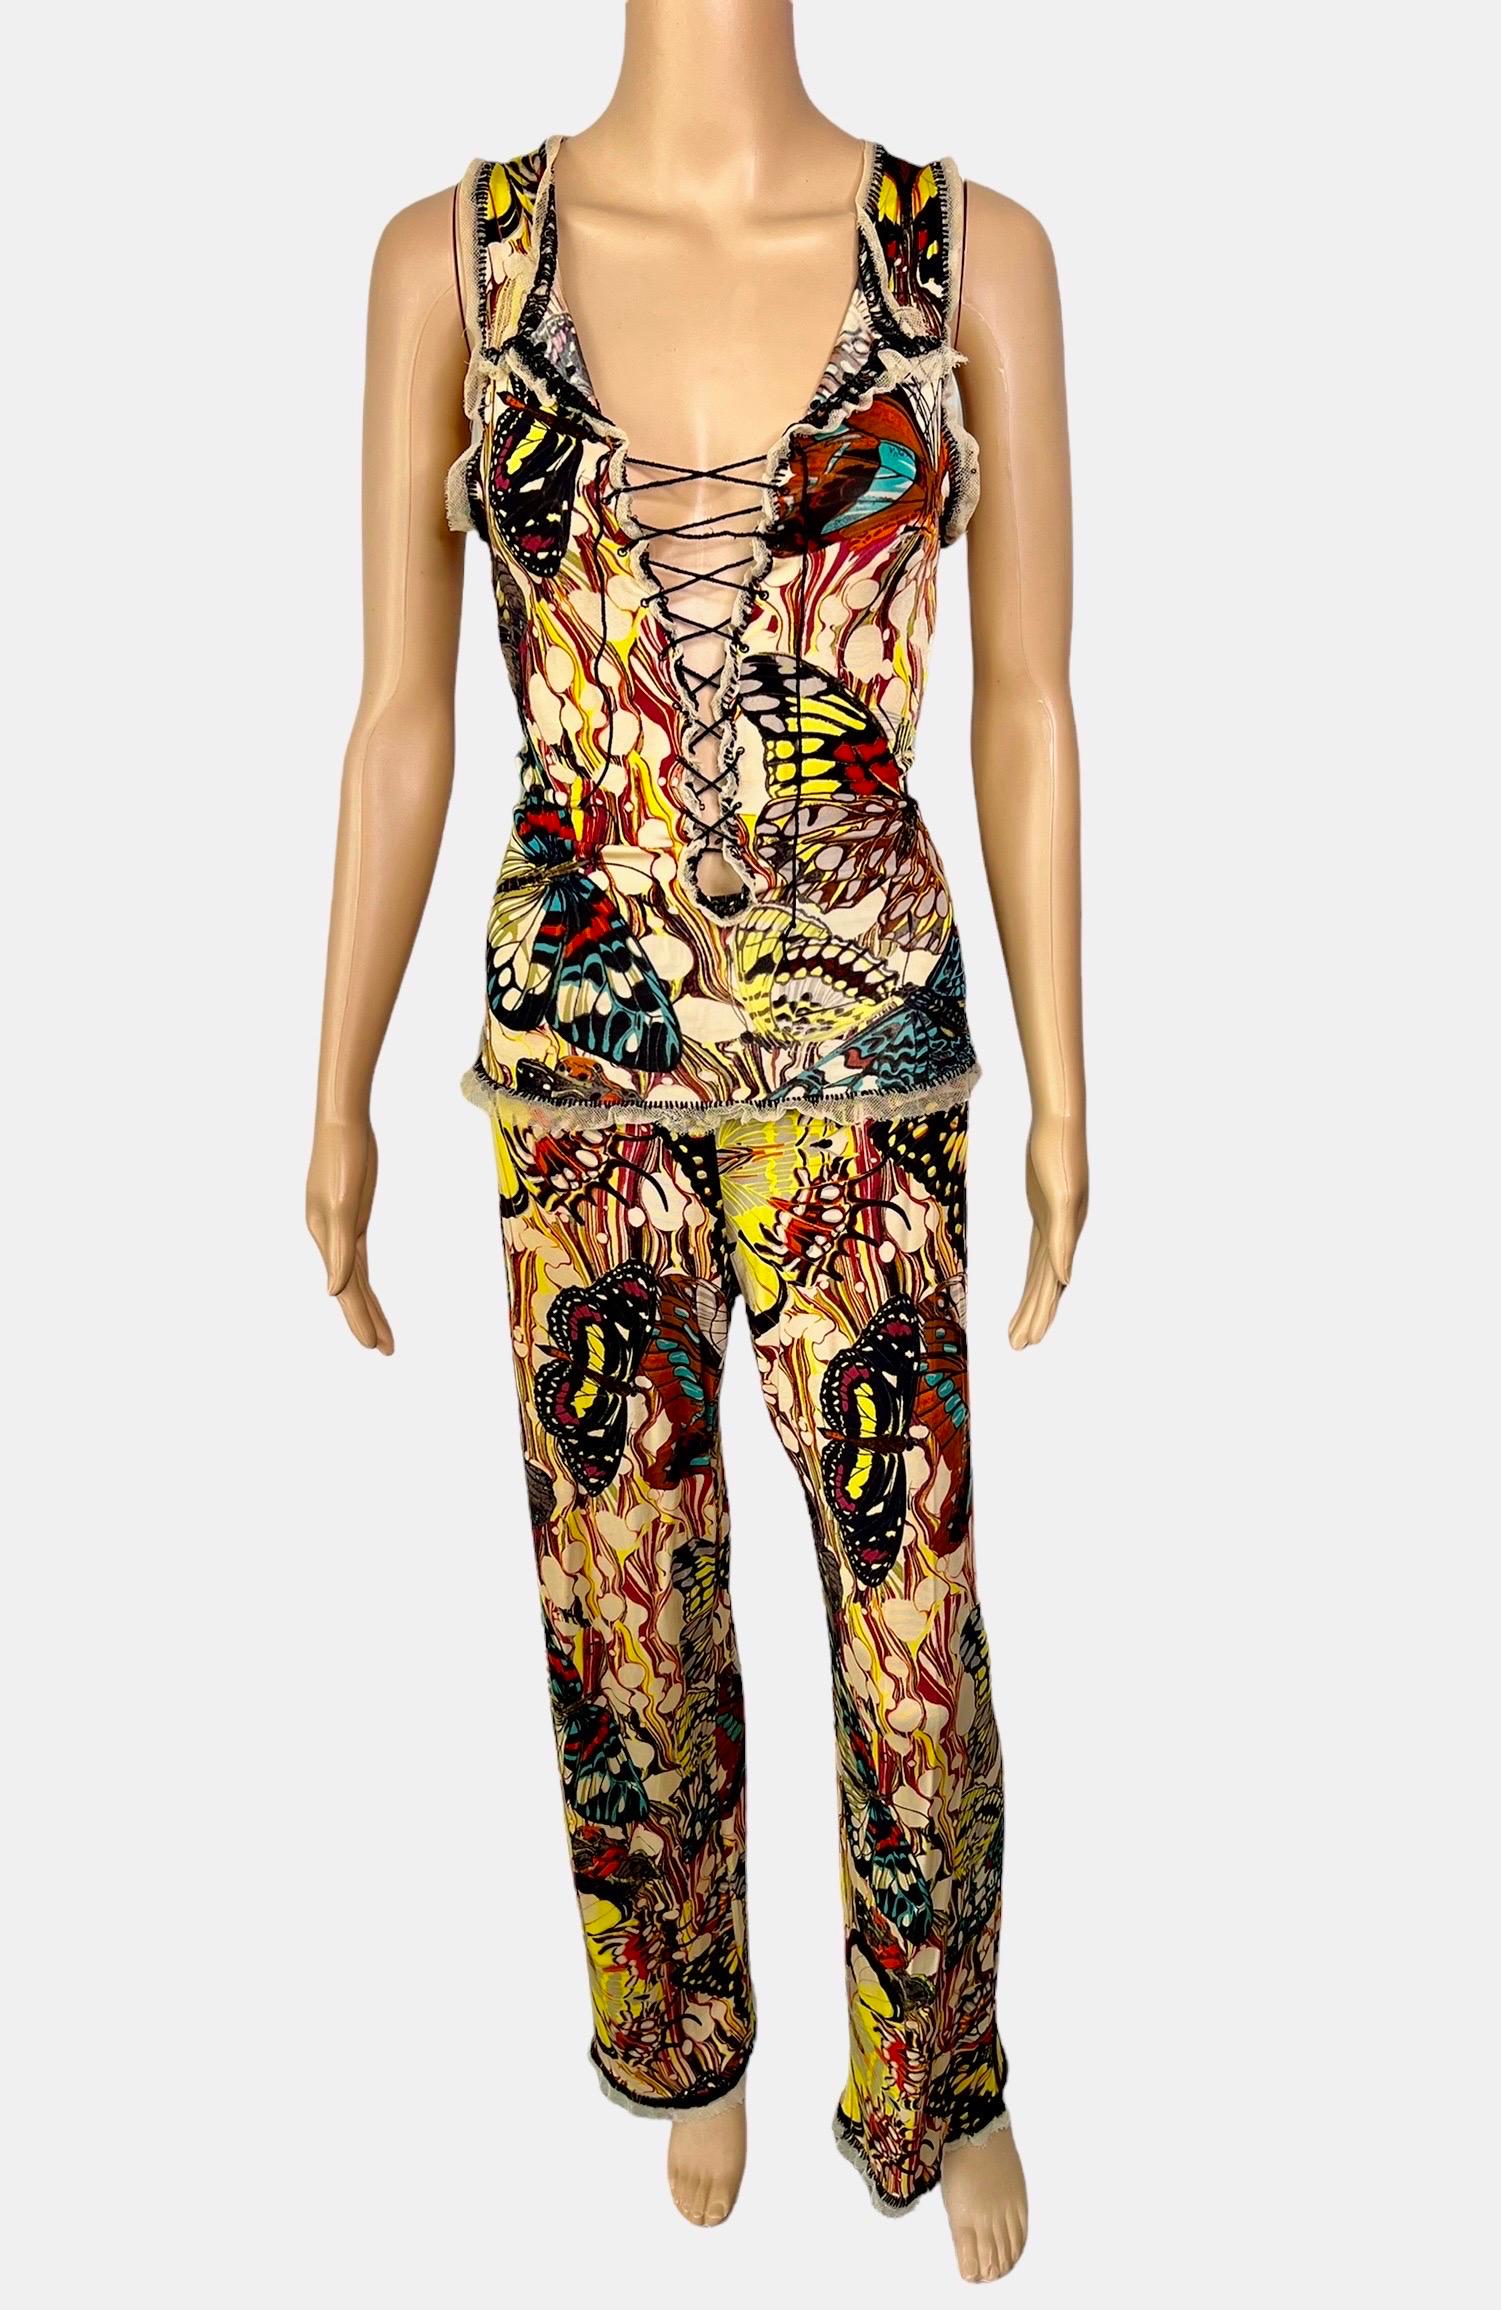 Jean Paul Gaultier S/S 2003 Vintage Butterfly Print Lace-Up Top & Pants Ensemble 2 Piece Set Size M/L

Please note the pants are size M and the top is size L.


